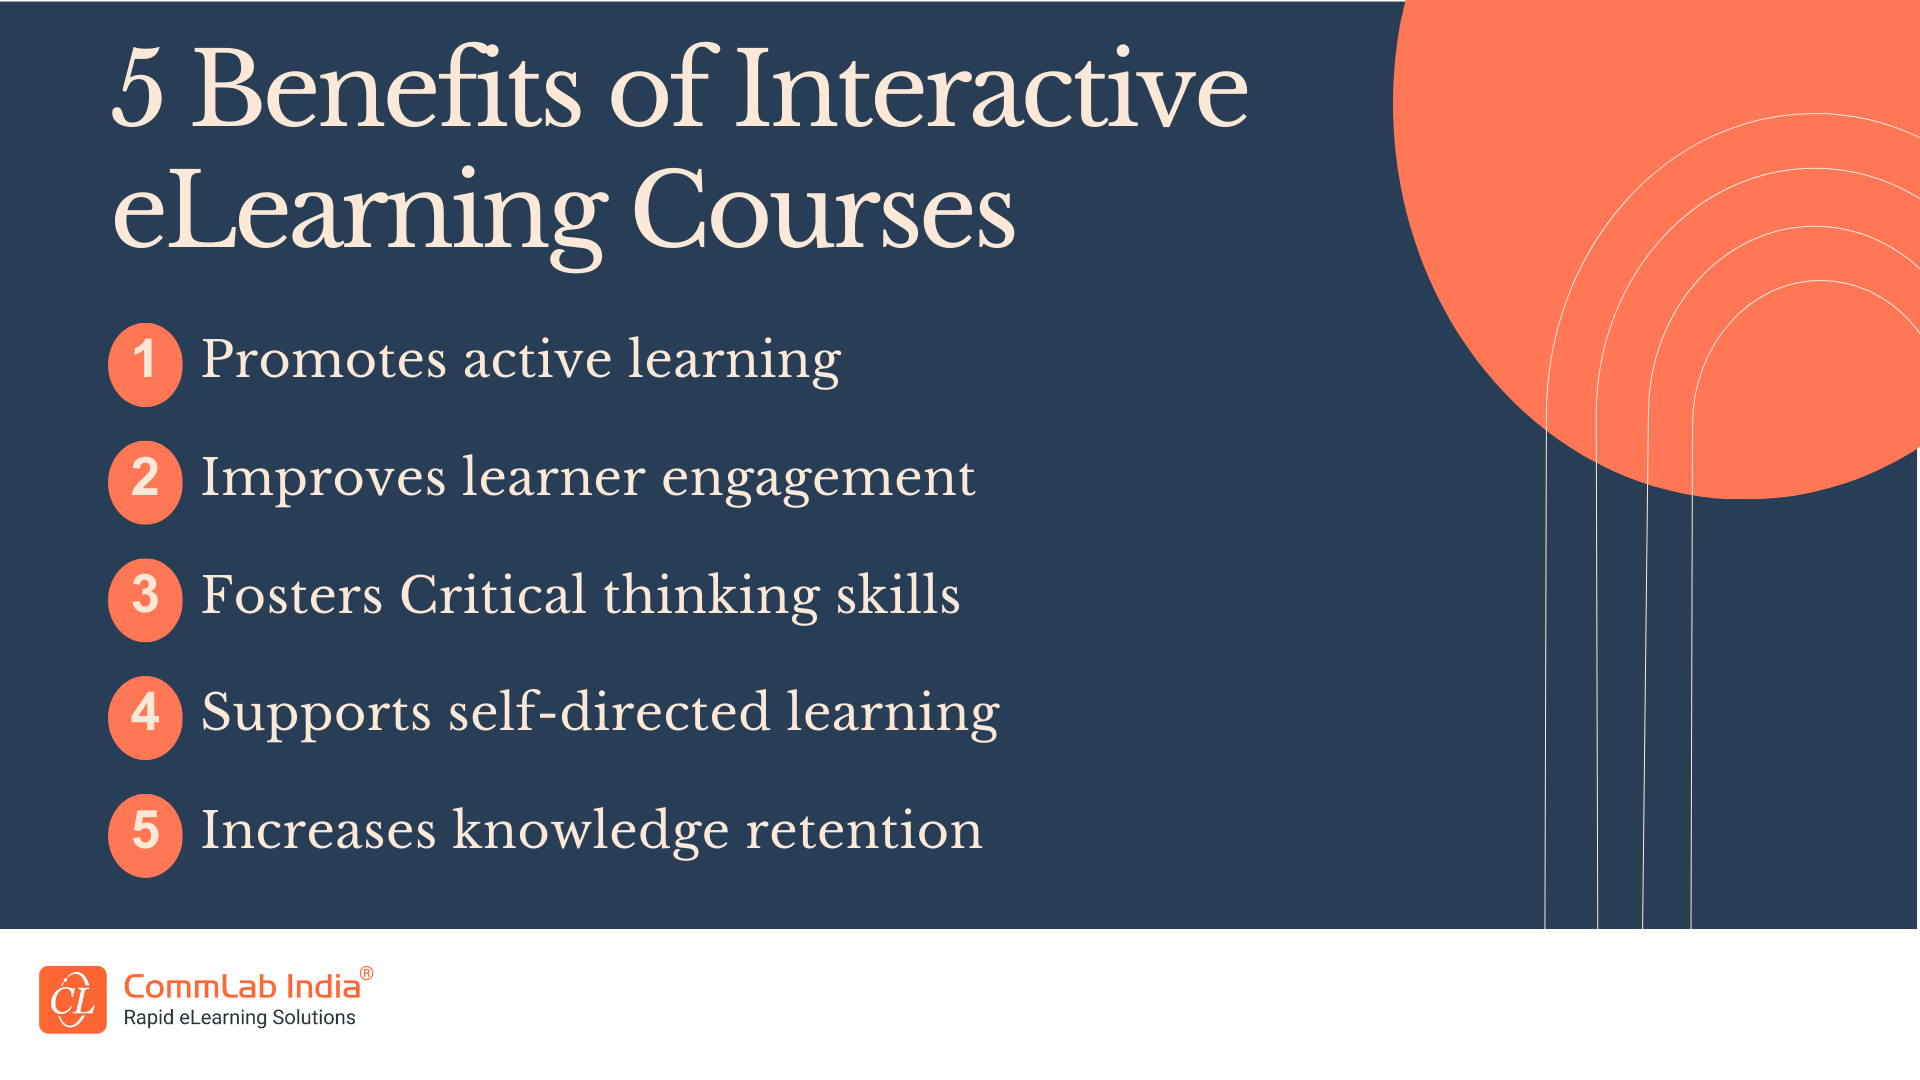 5 Benefits of Interactive eLearning Courses